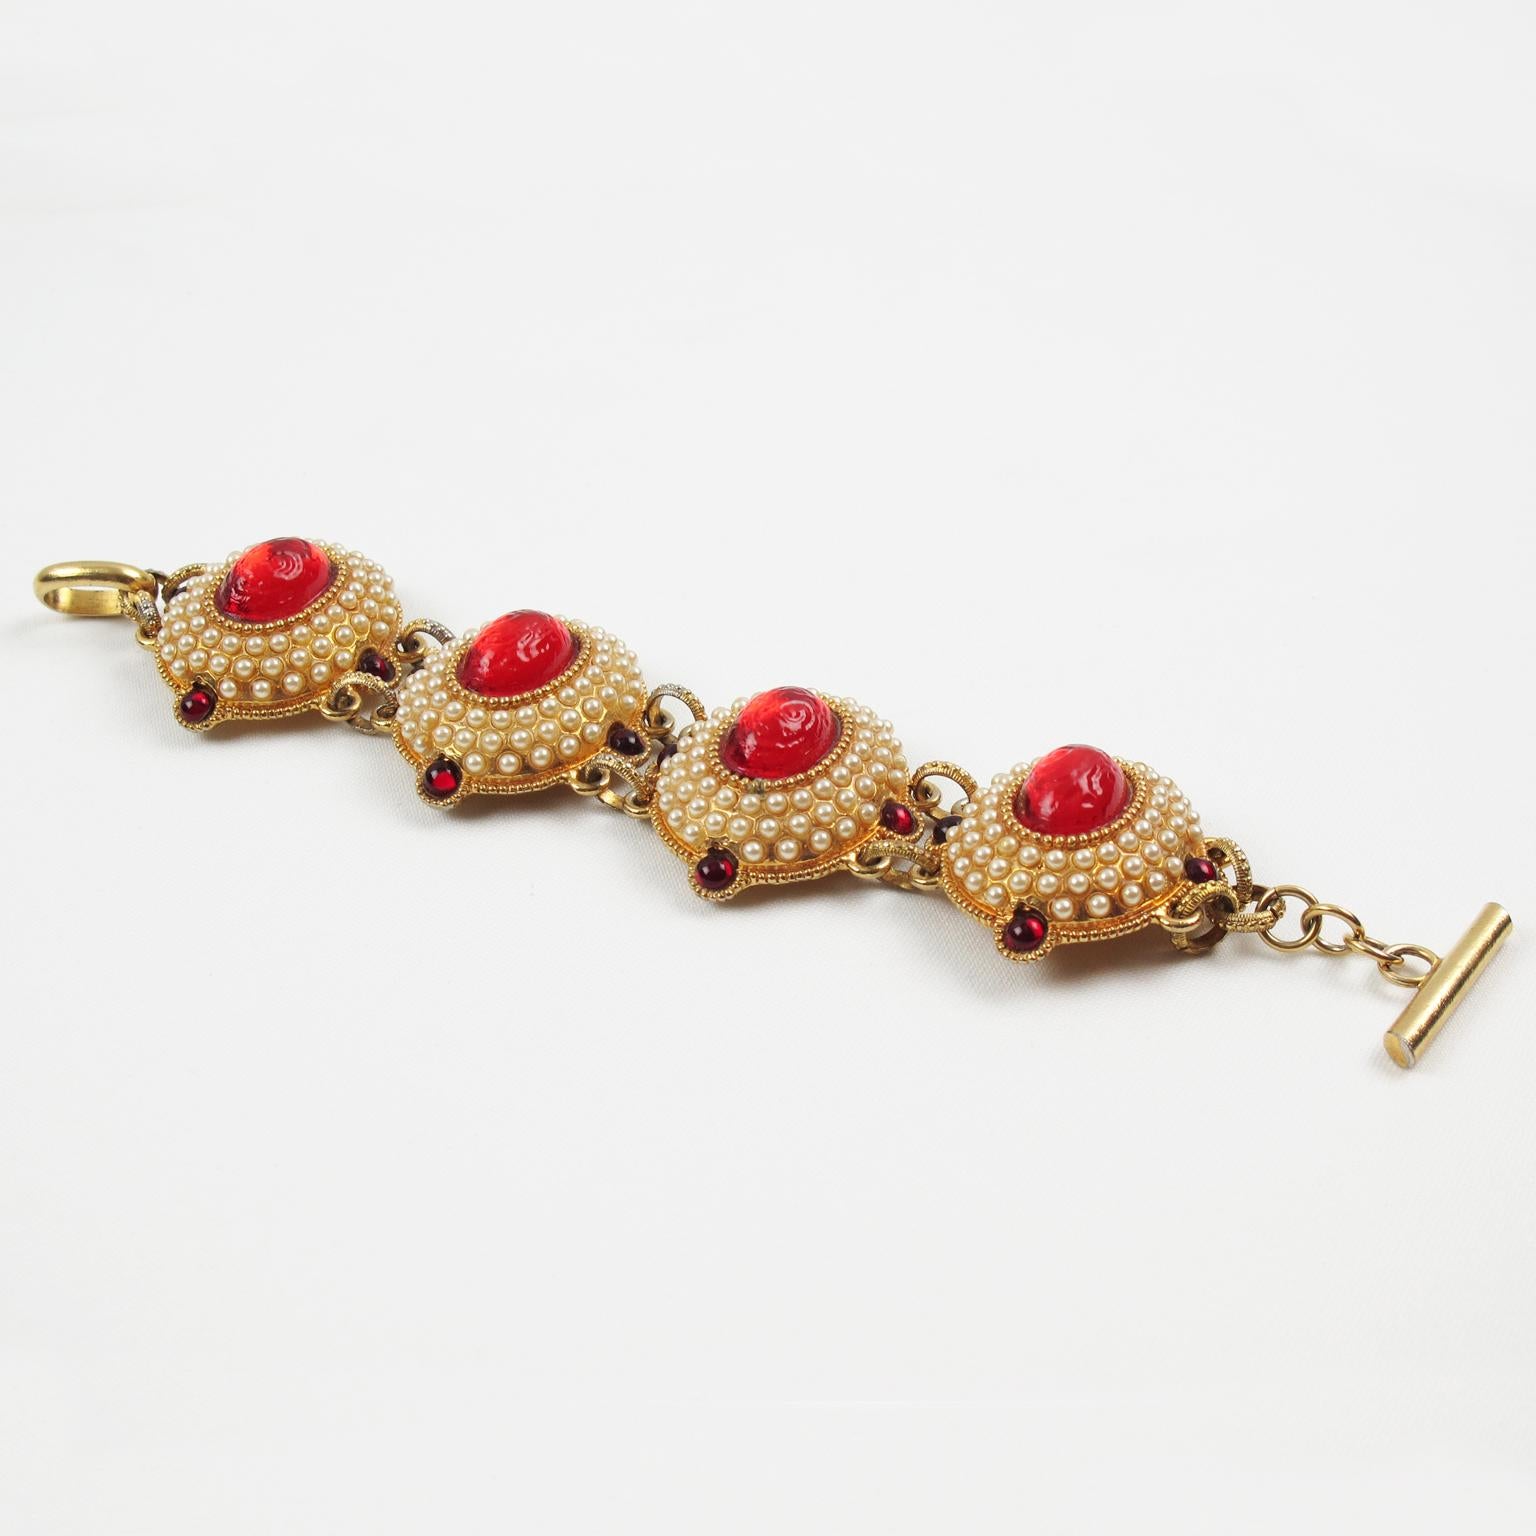 This lovely French Designer Chantal Thomass Paris jeweled link bracelet features gilded-metal carved and domed elements, all paved and ornate with half pearl-like and ruby red cabochons. An impressive ruby-red textured resin cabochon embellishes